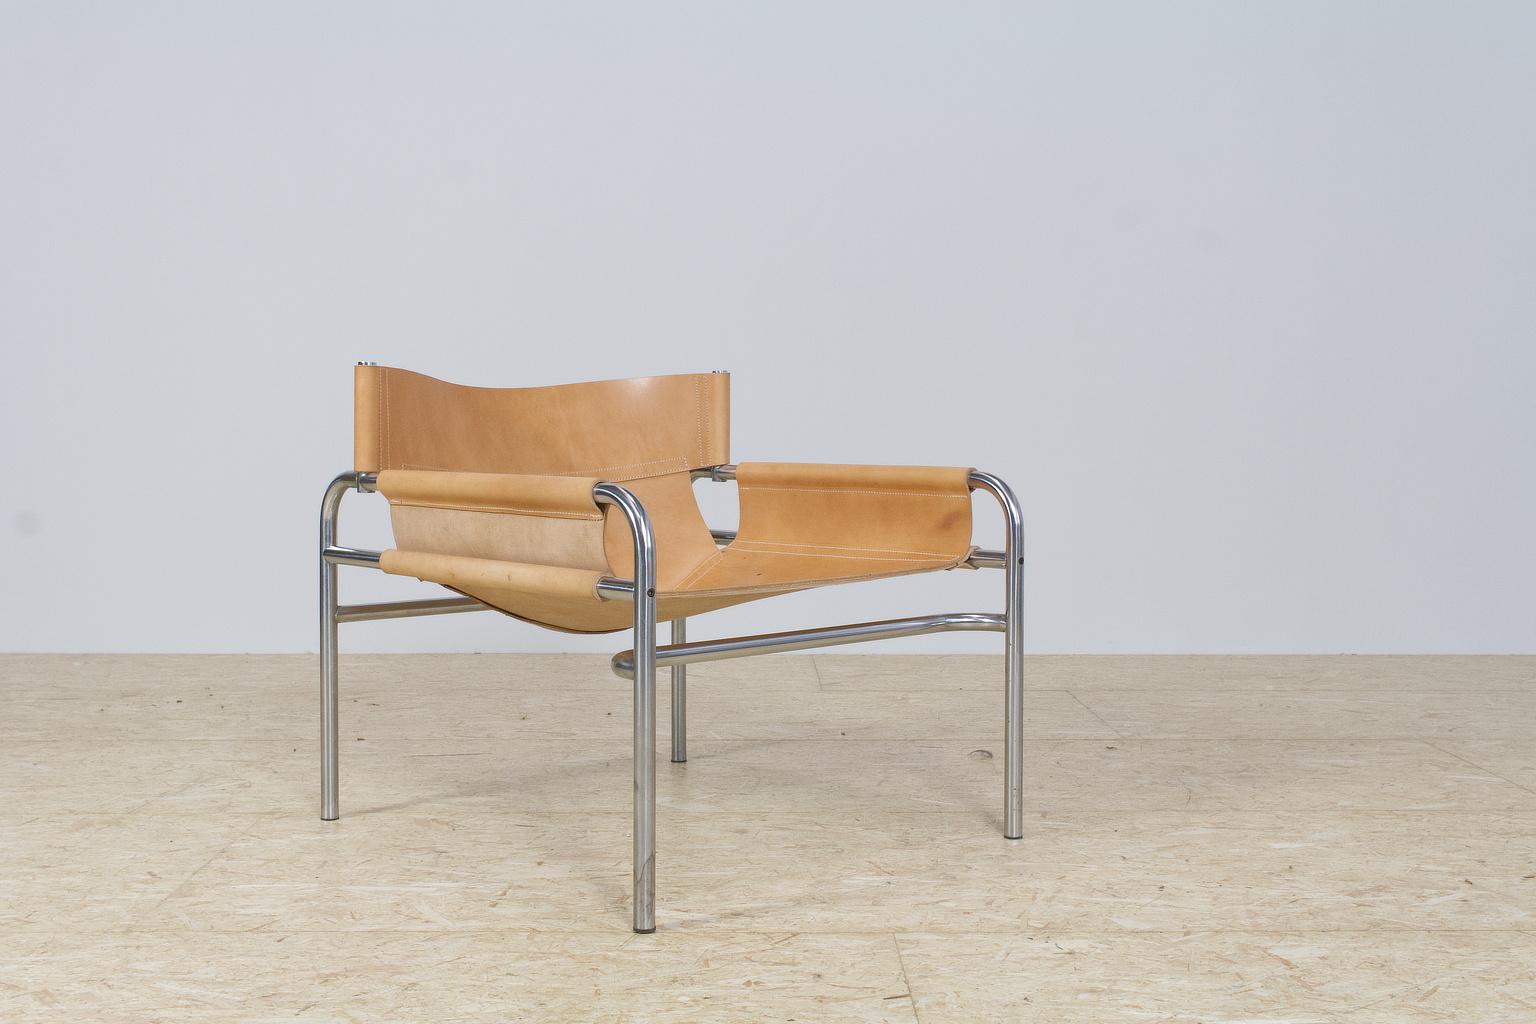 Mid-Century Modernist Lounge Chairs in Saddle Leather by Walter Antonis, 1974 For Sale 3